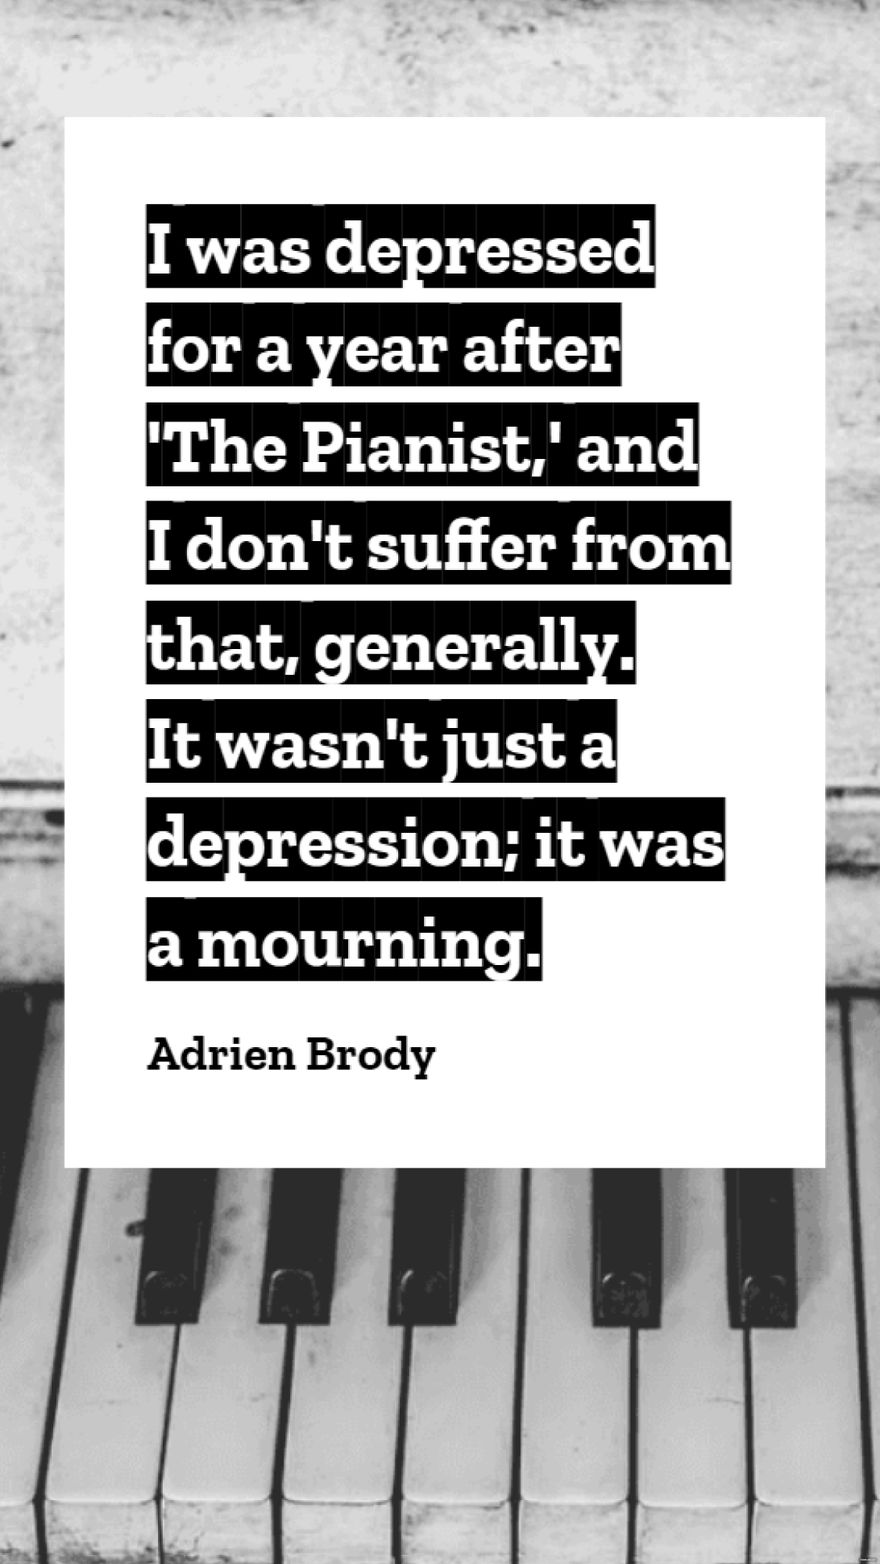 Adrien Brody - I was depressed for a year after 'The Pianist,' and I don't suffer from that, generally. It wasn't just a depression; it was a mourning.